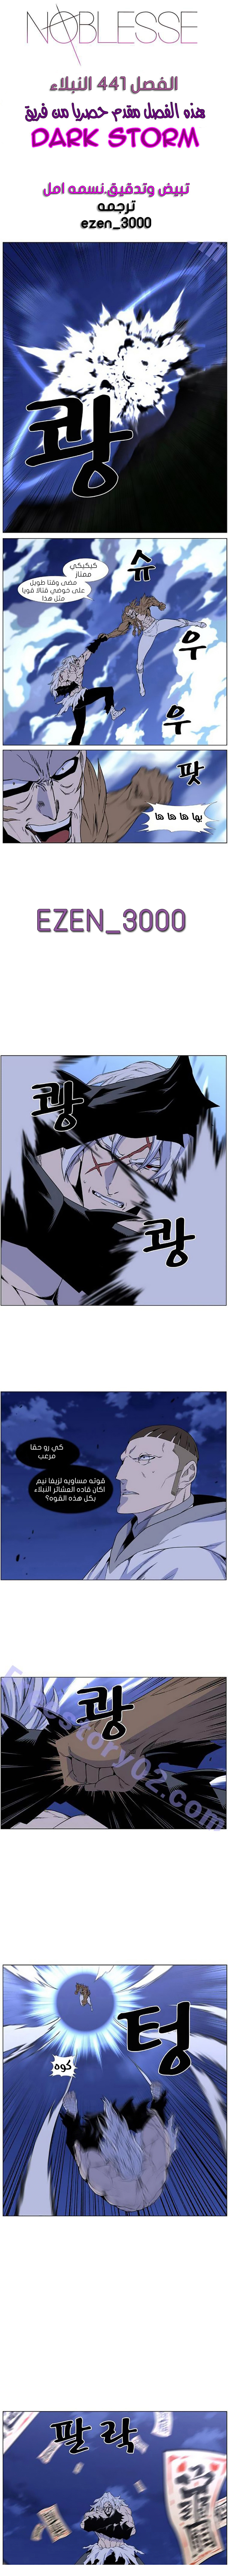 Noblesse: Chapter 441 - Page 1